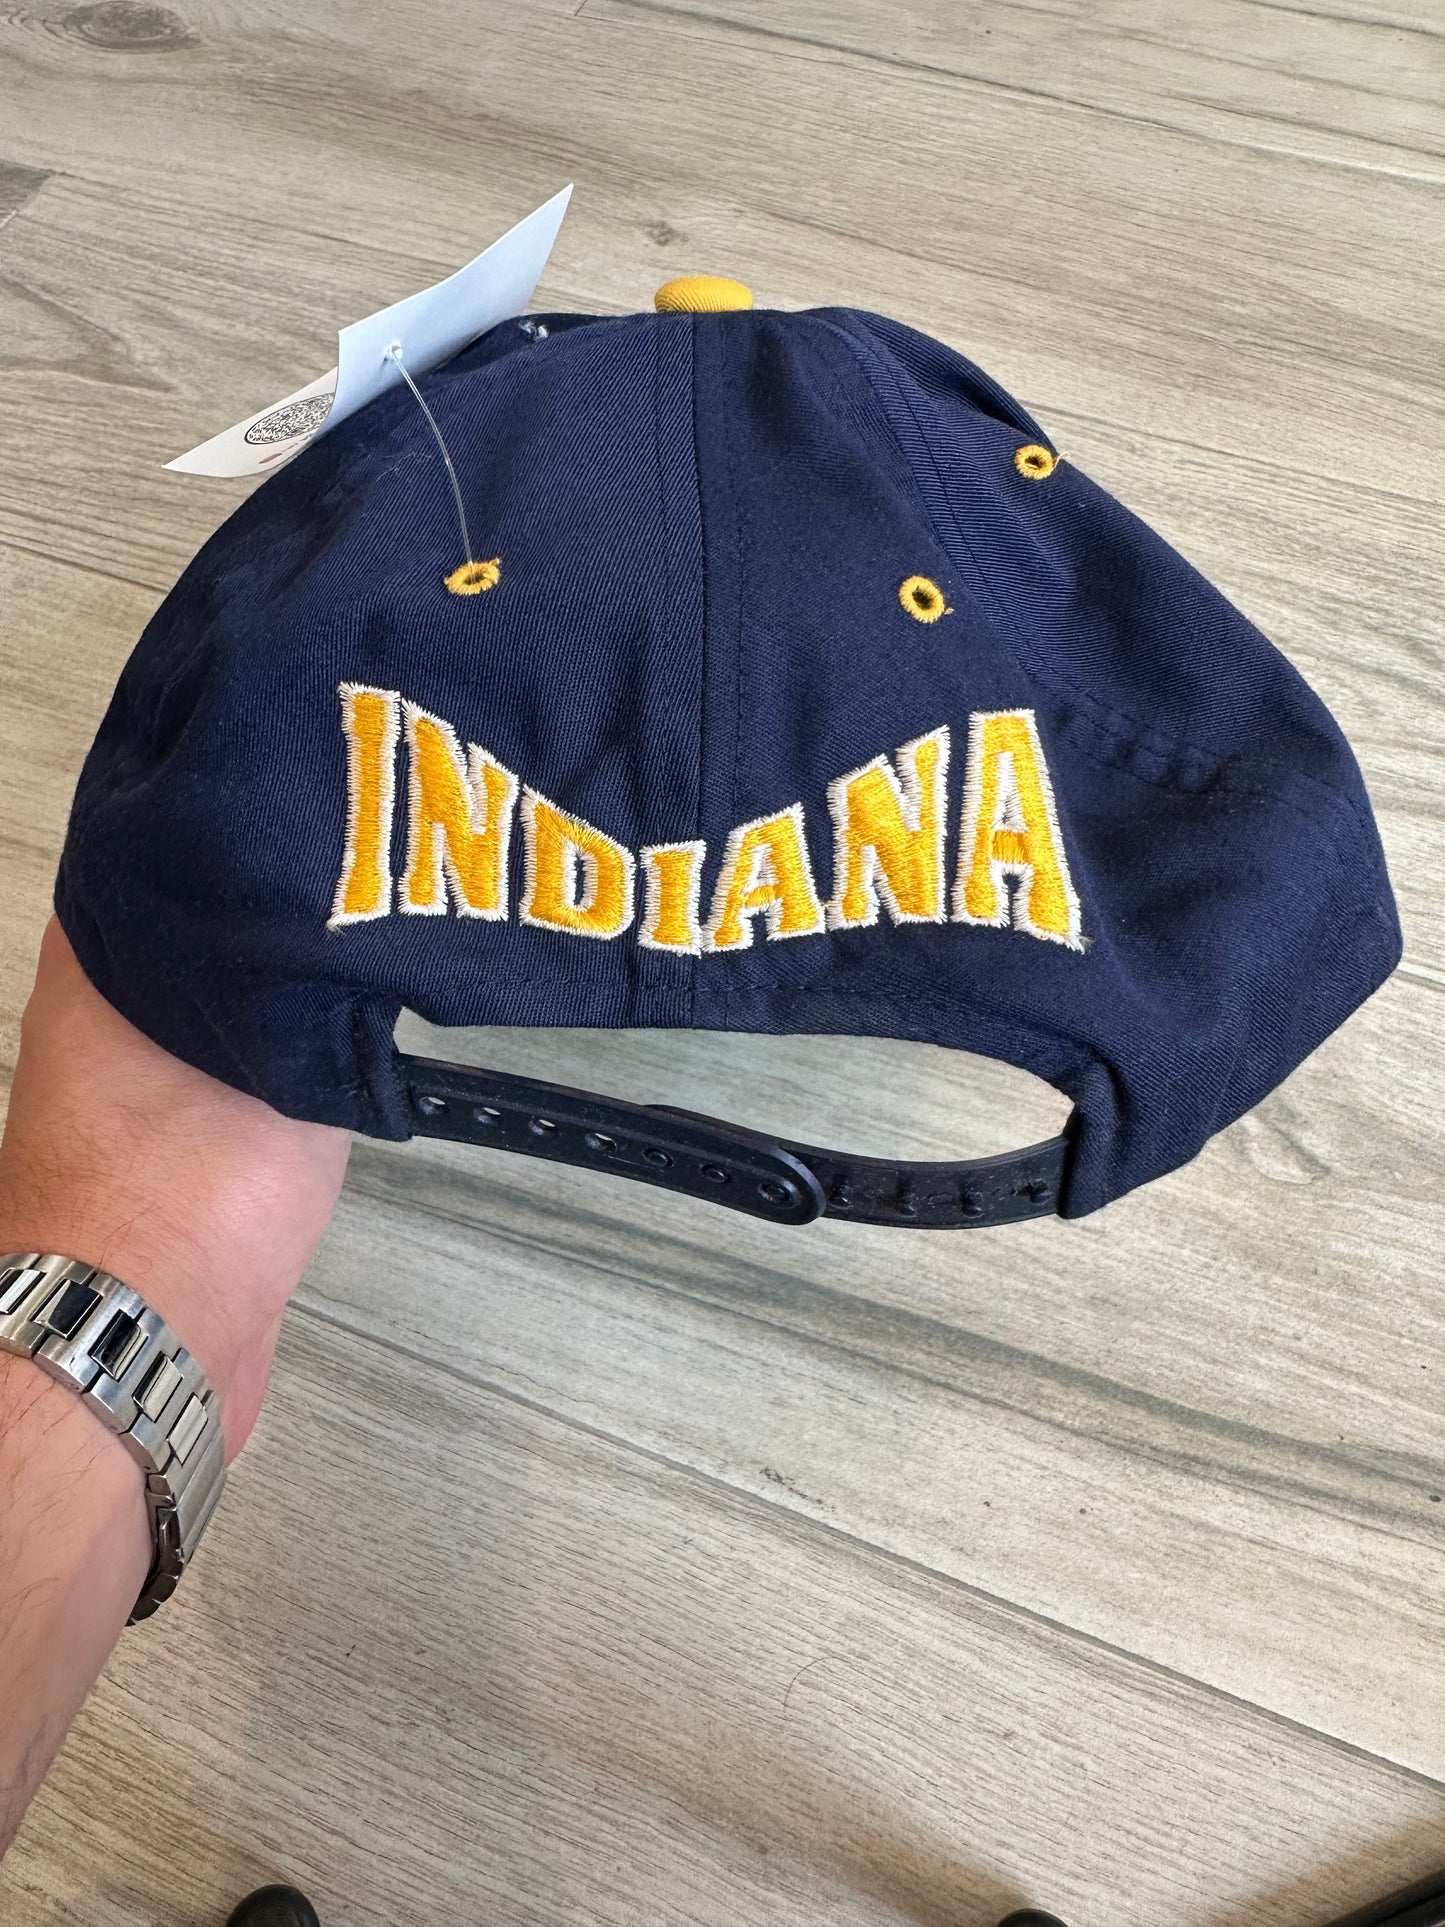 Pacers SnapBack